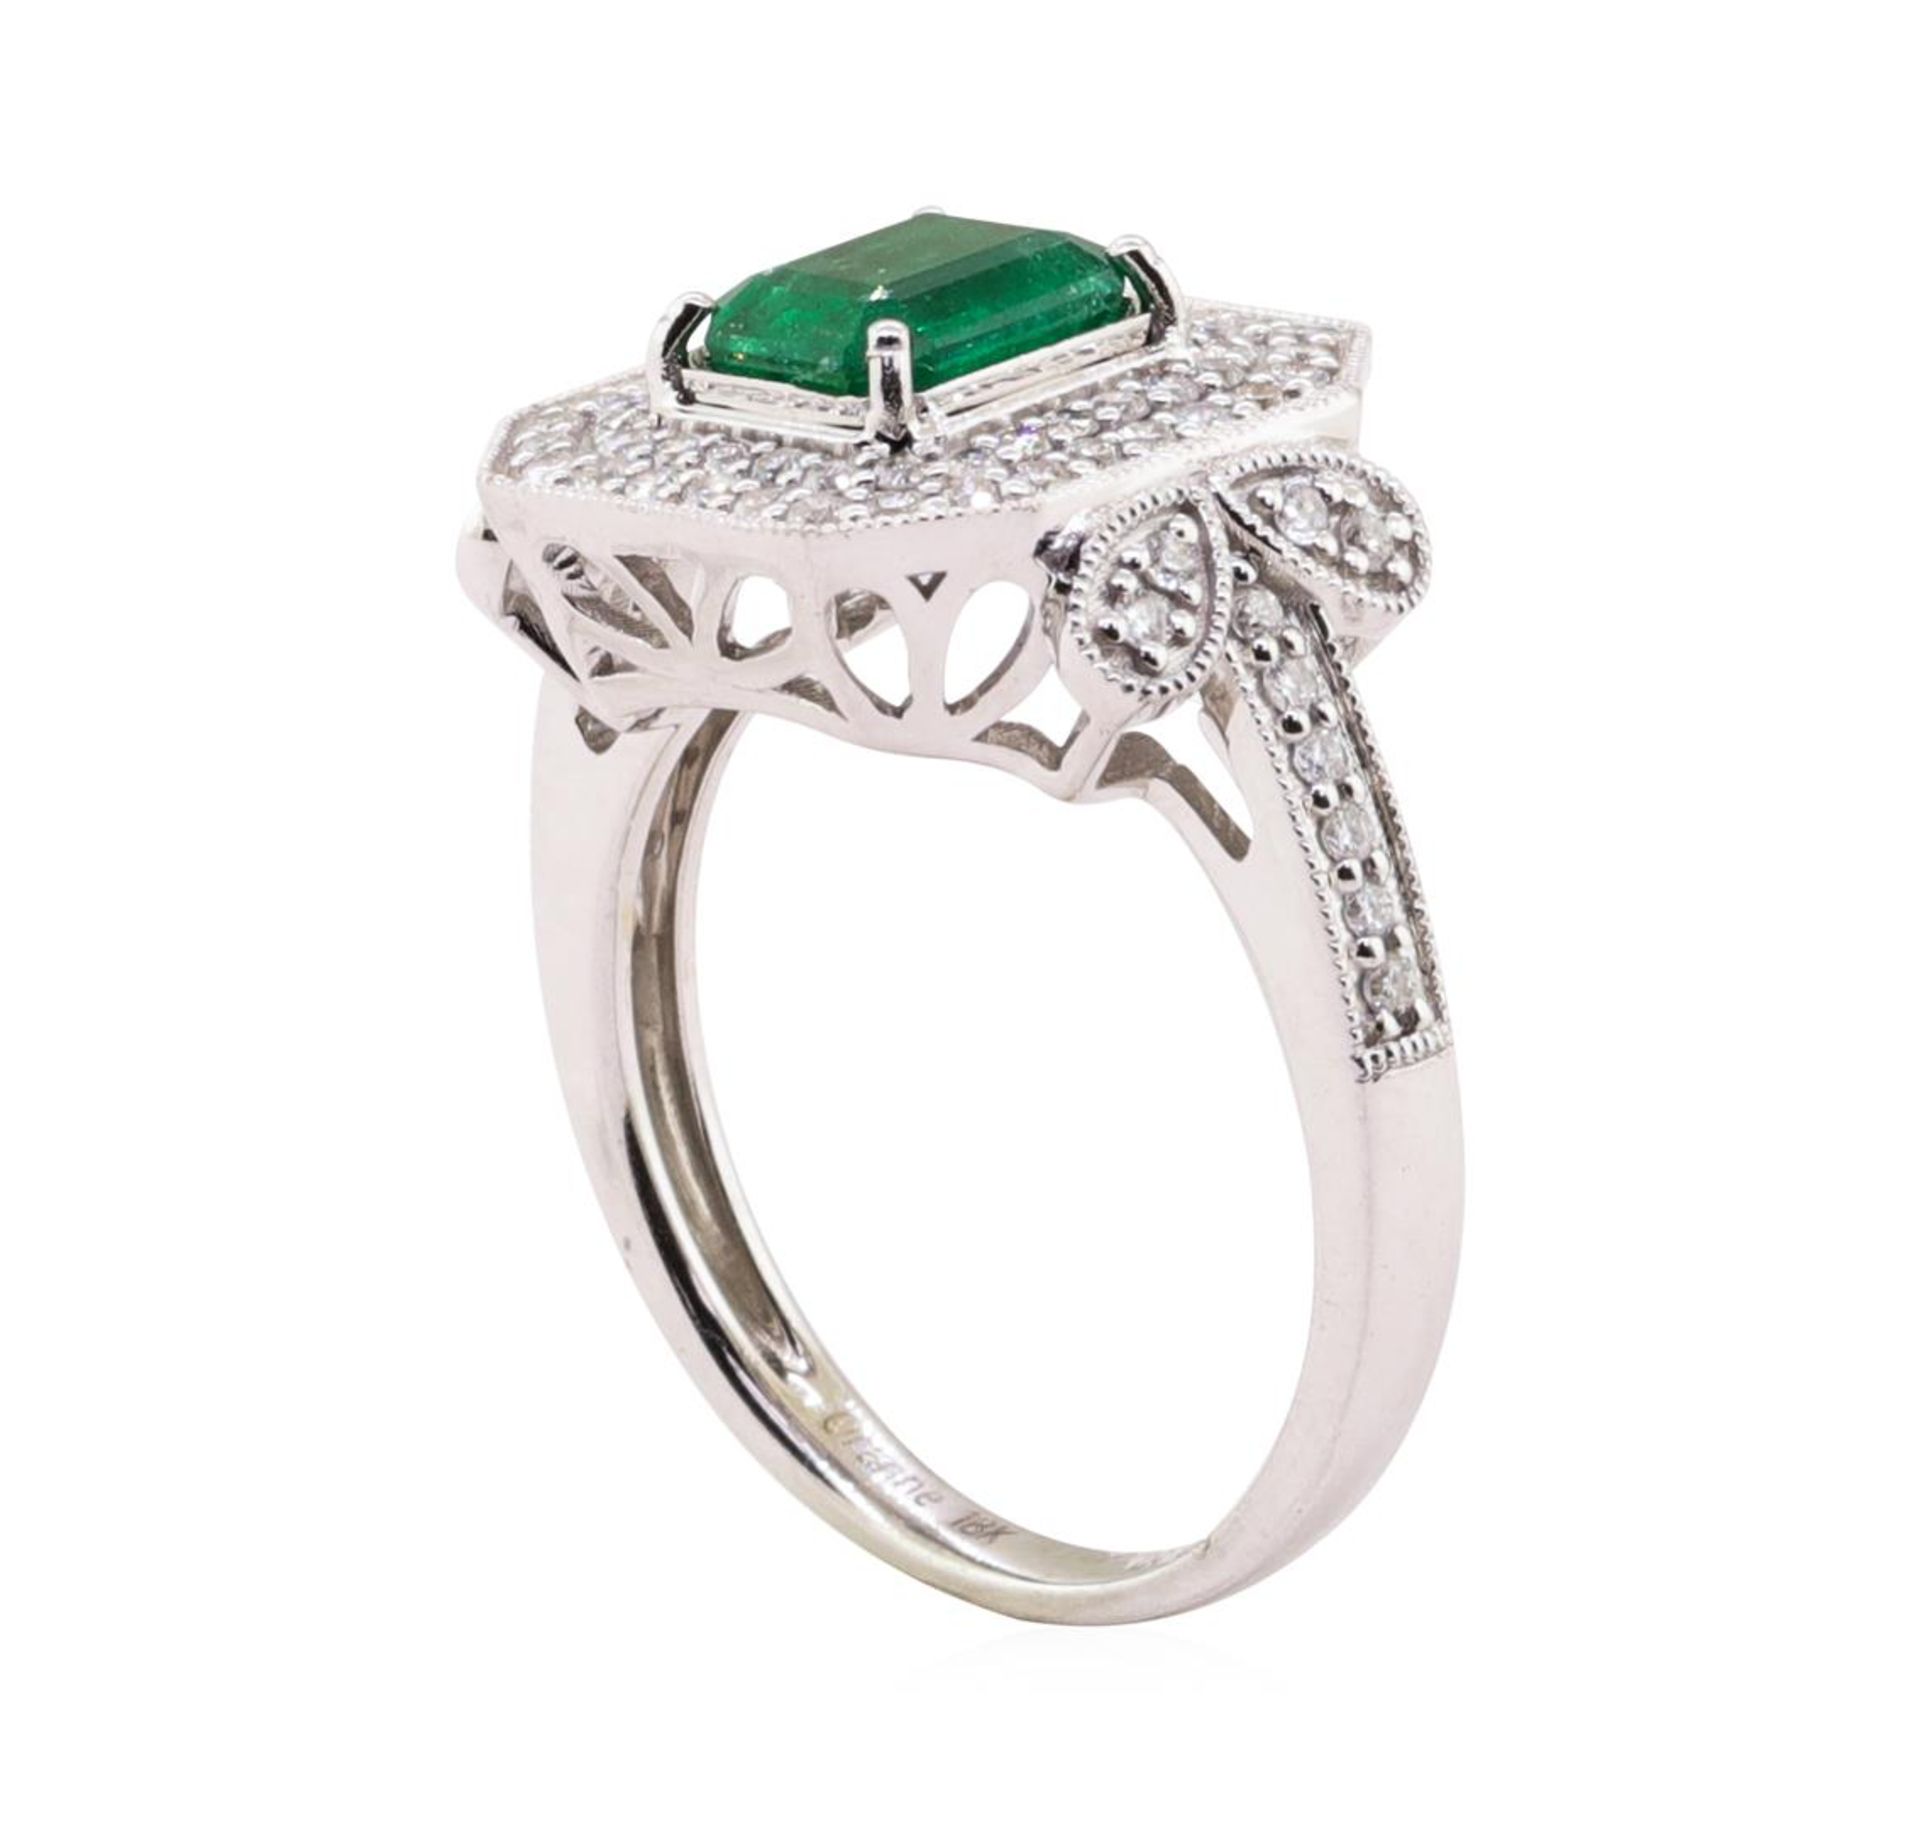 1.15 ctw Emerald and Diamond Ring - 18KT White Gold - Image 4 of 5